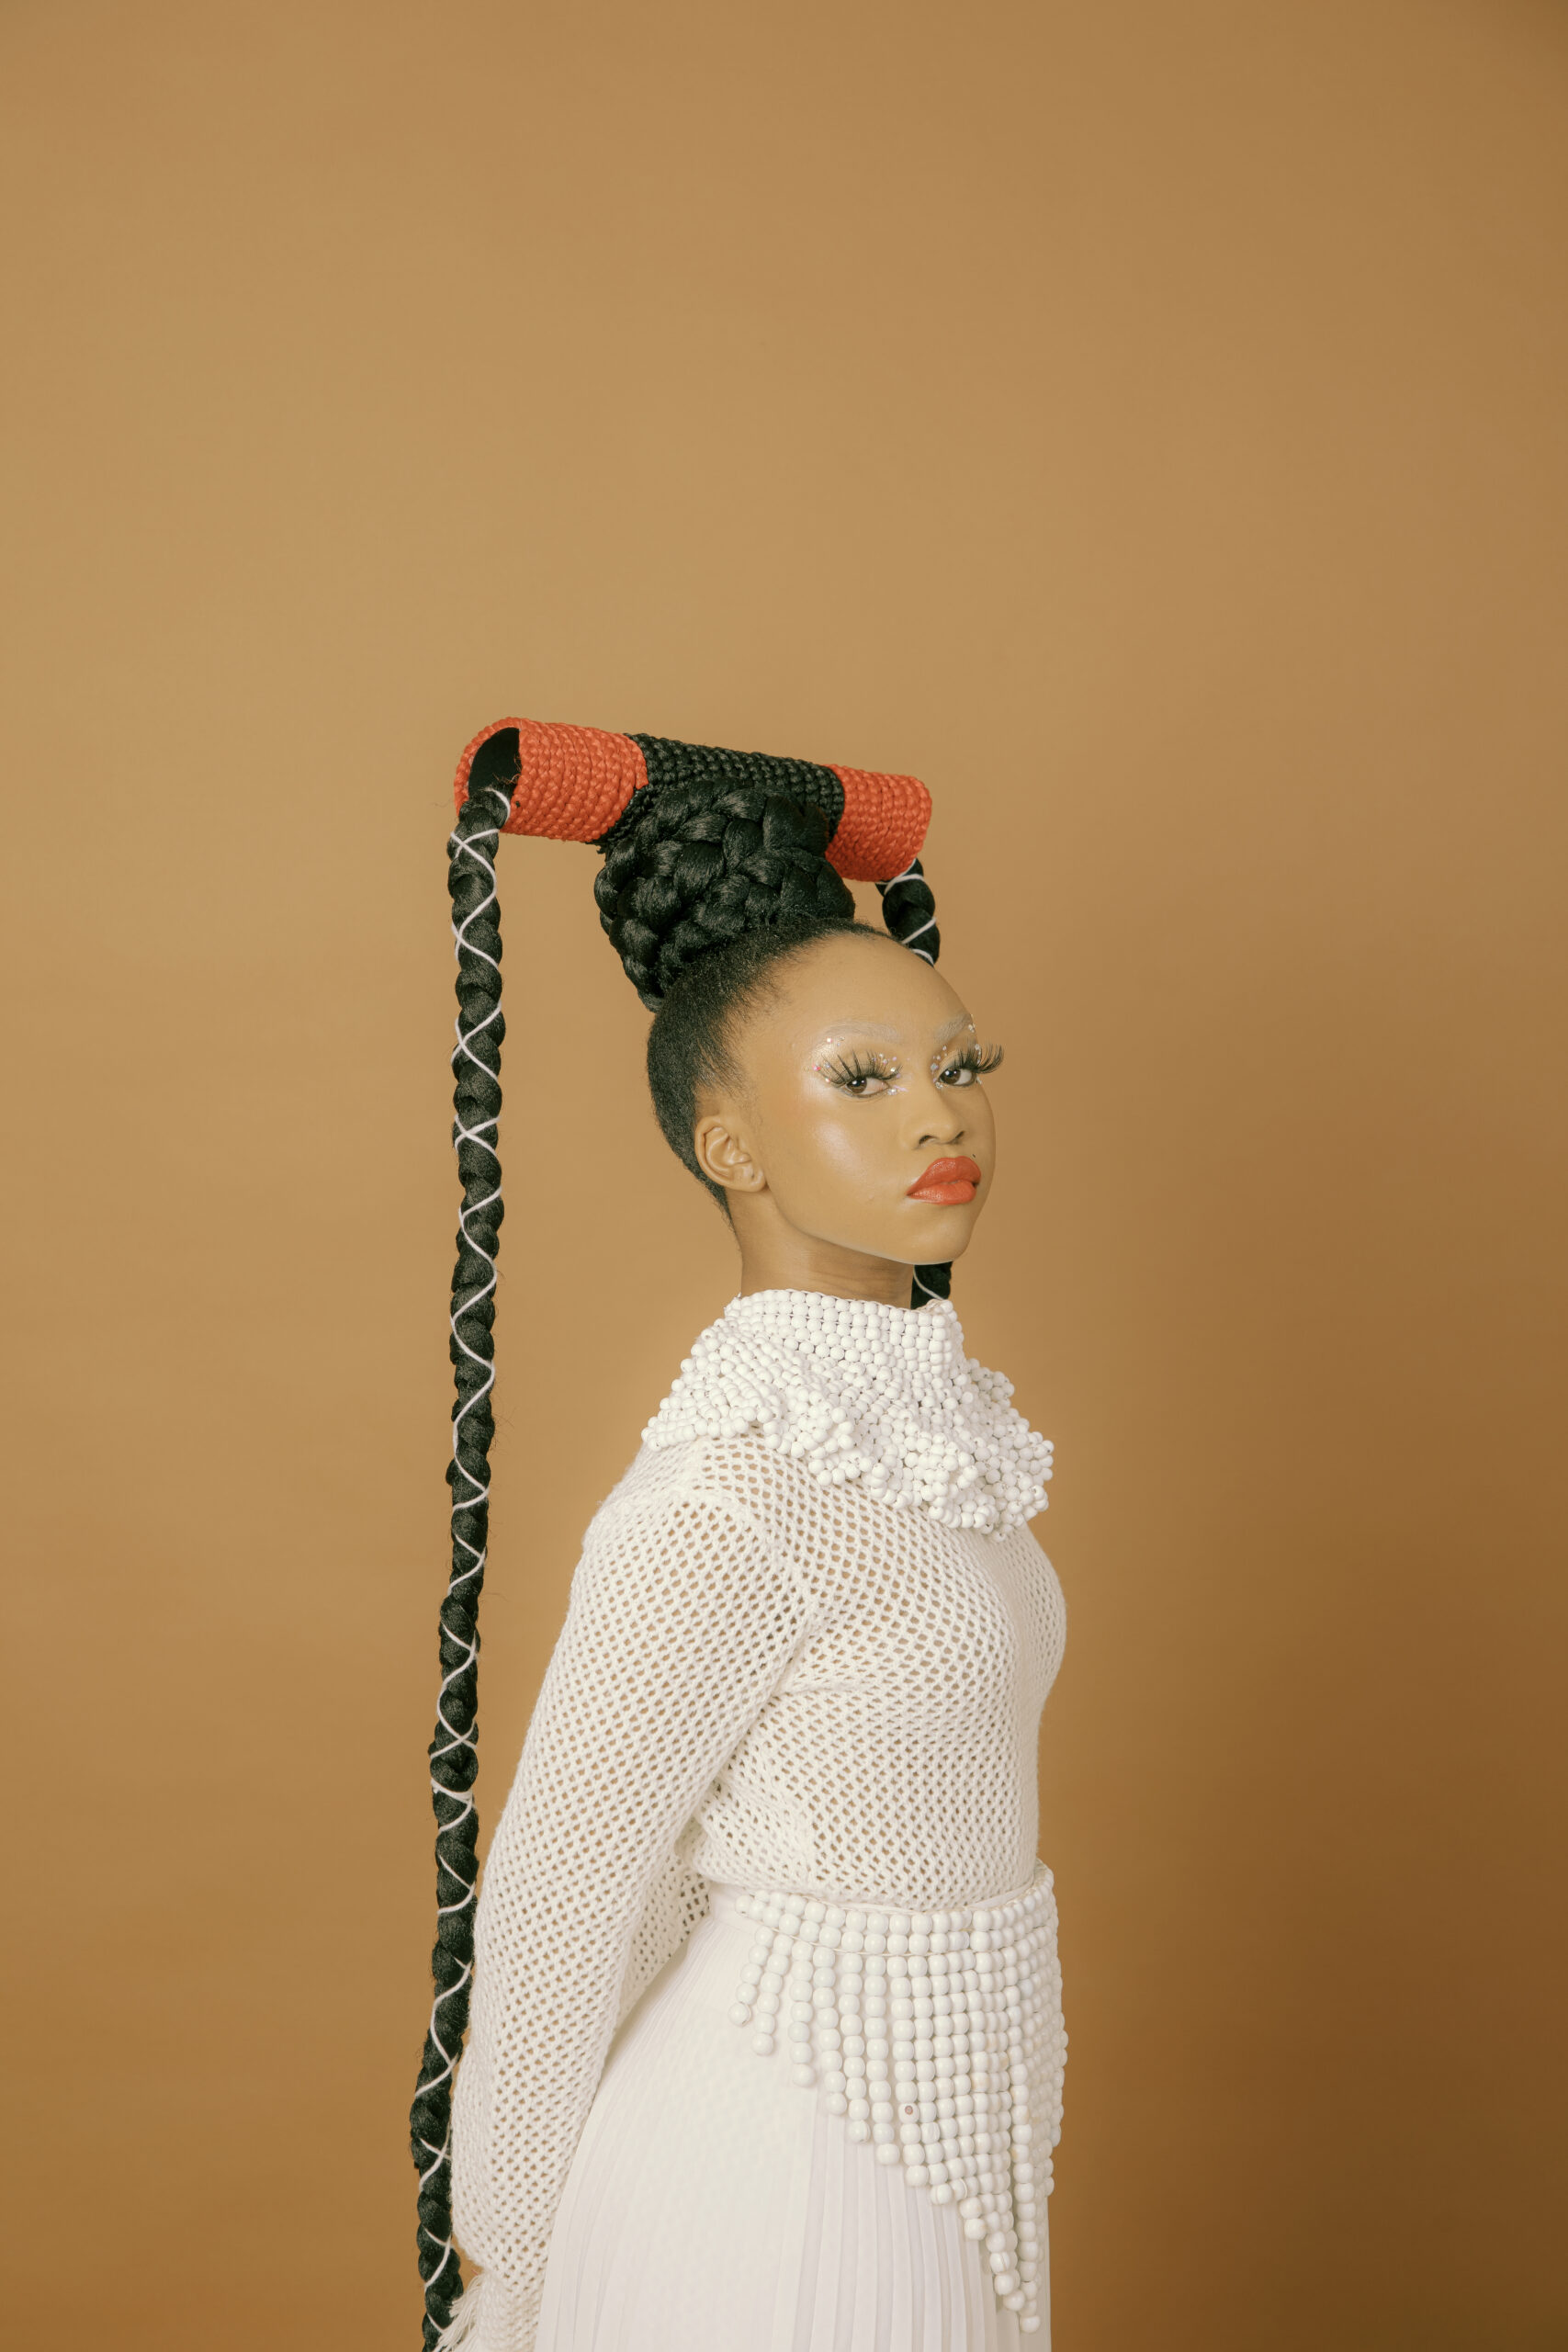 Mwanjé is Using Her Imagination to Summon The Diaspora [interview]